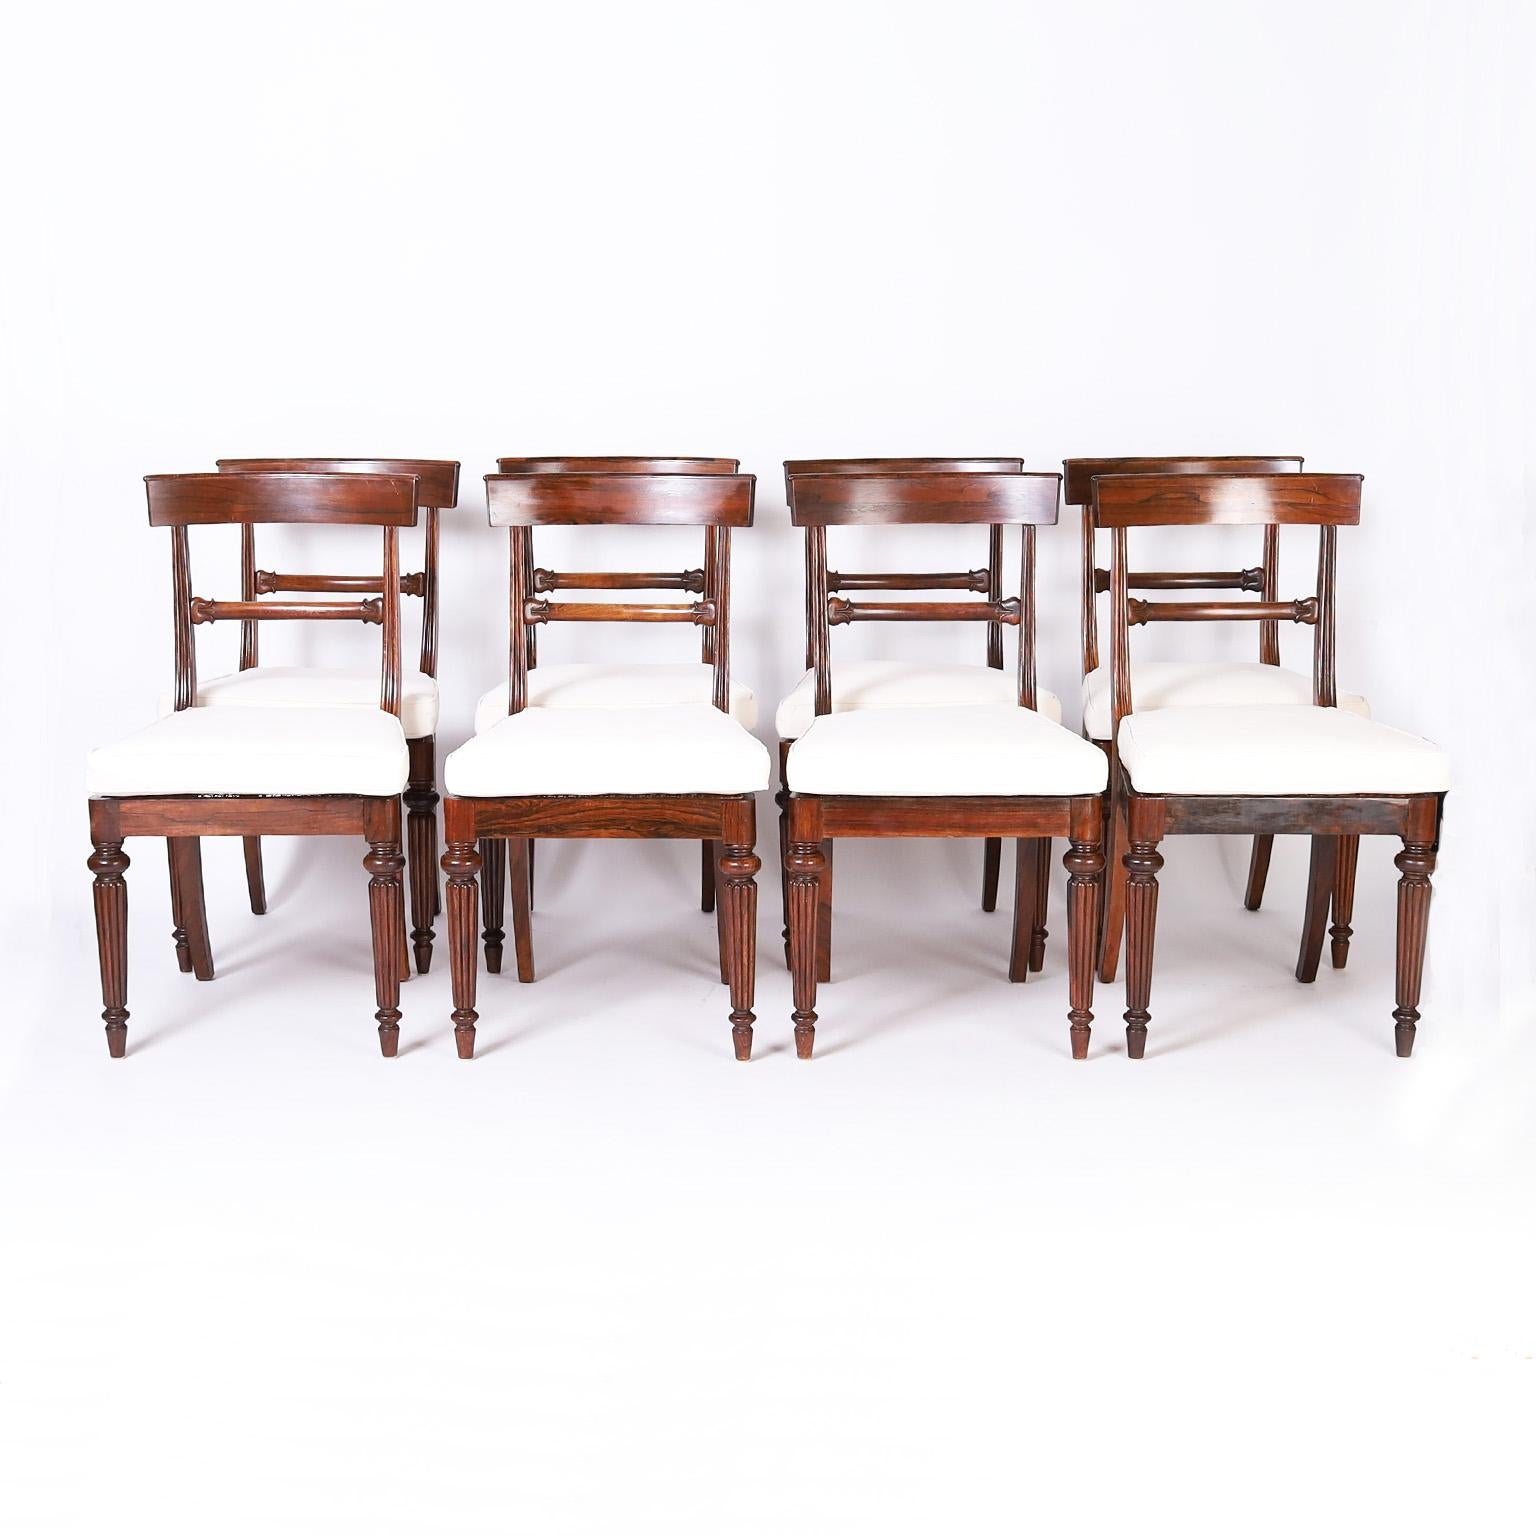 Set of eight 19th century William IV dining chairs crafted in rosewood with lush woodgrains and featuring Klismos style backs hand caned seats and elegant turned and beaded front legs.

Seat height with cushion is 18.5